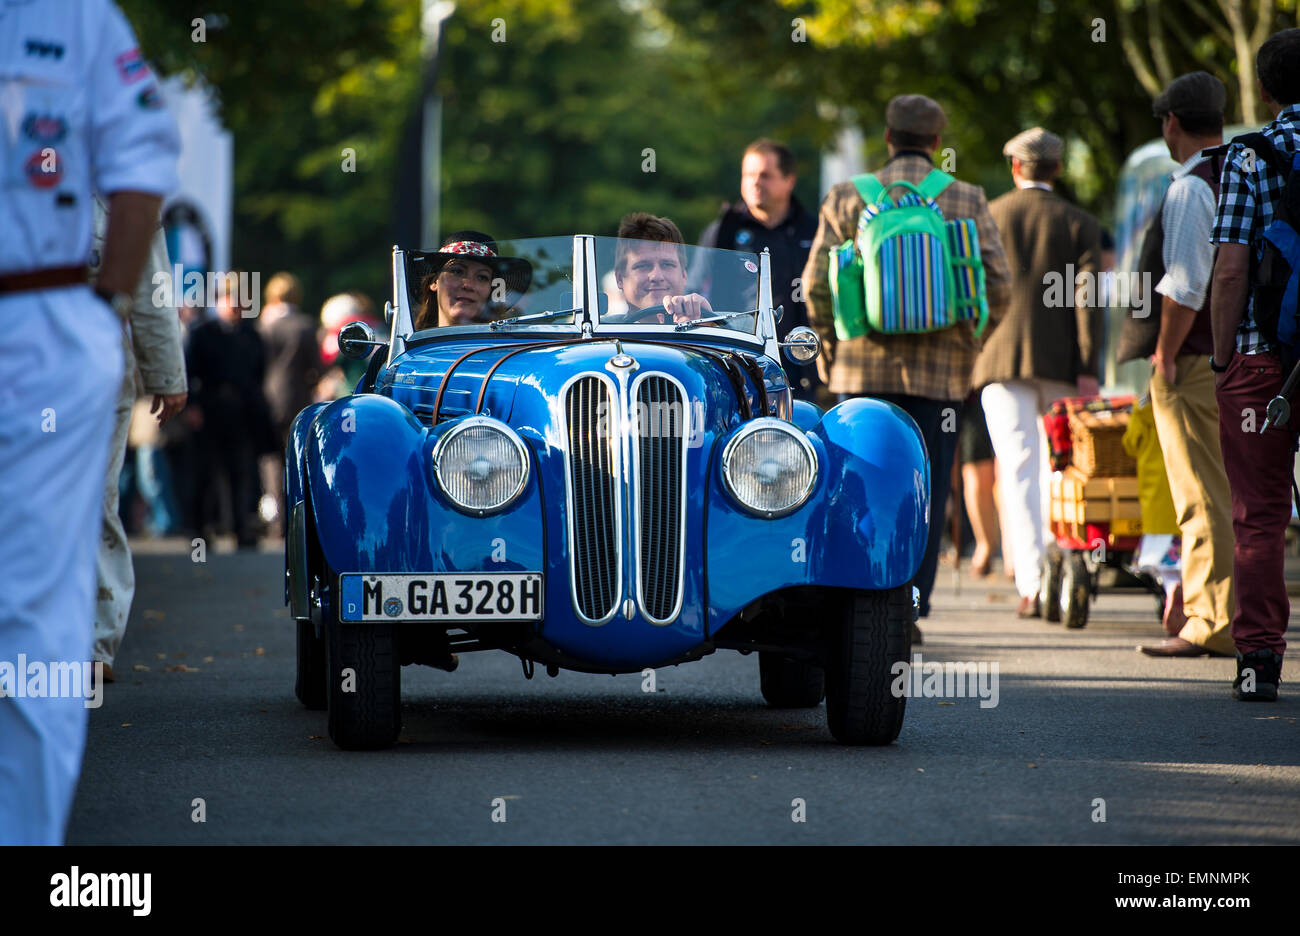 CHICHESTER, ENGLAND - September 12-14, 2014: Historic automobile racing festivities on and off the track for the Goodwood Revival. The Revival celebrates the golden age of motorsport at the Goodwood Motor Circuit, from 1948 to 1966. Stock Photo